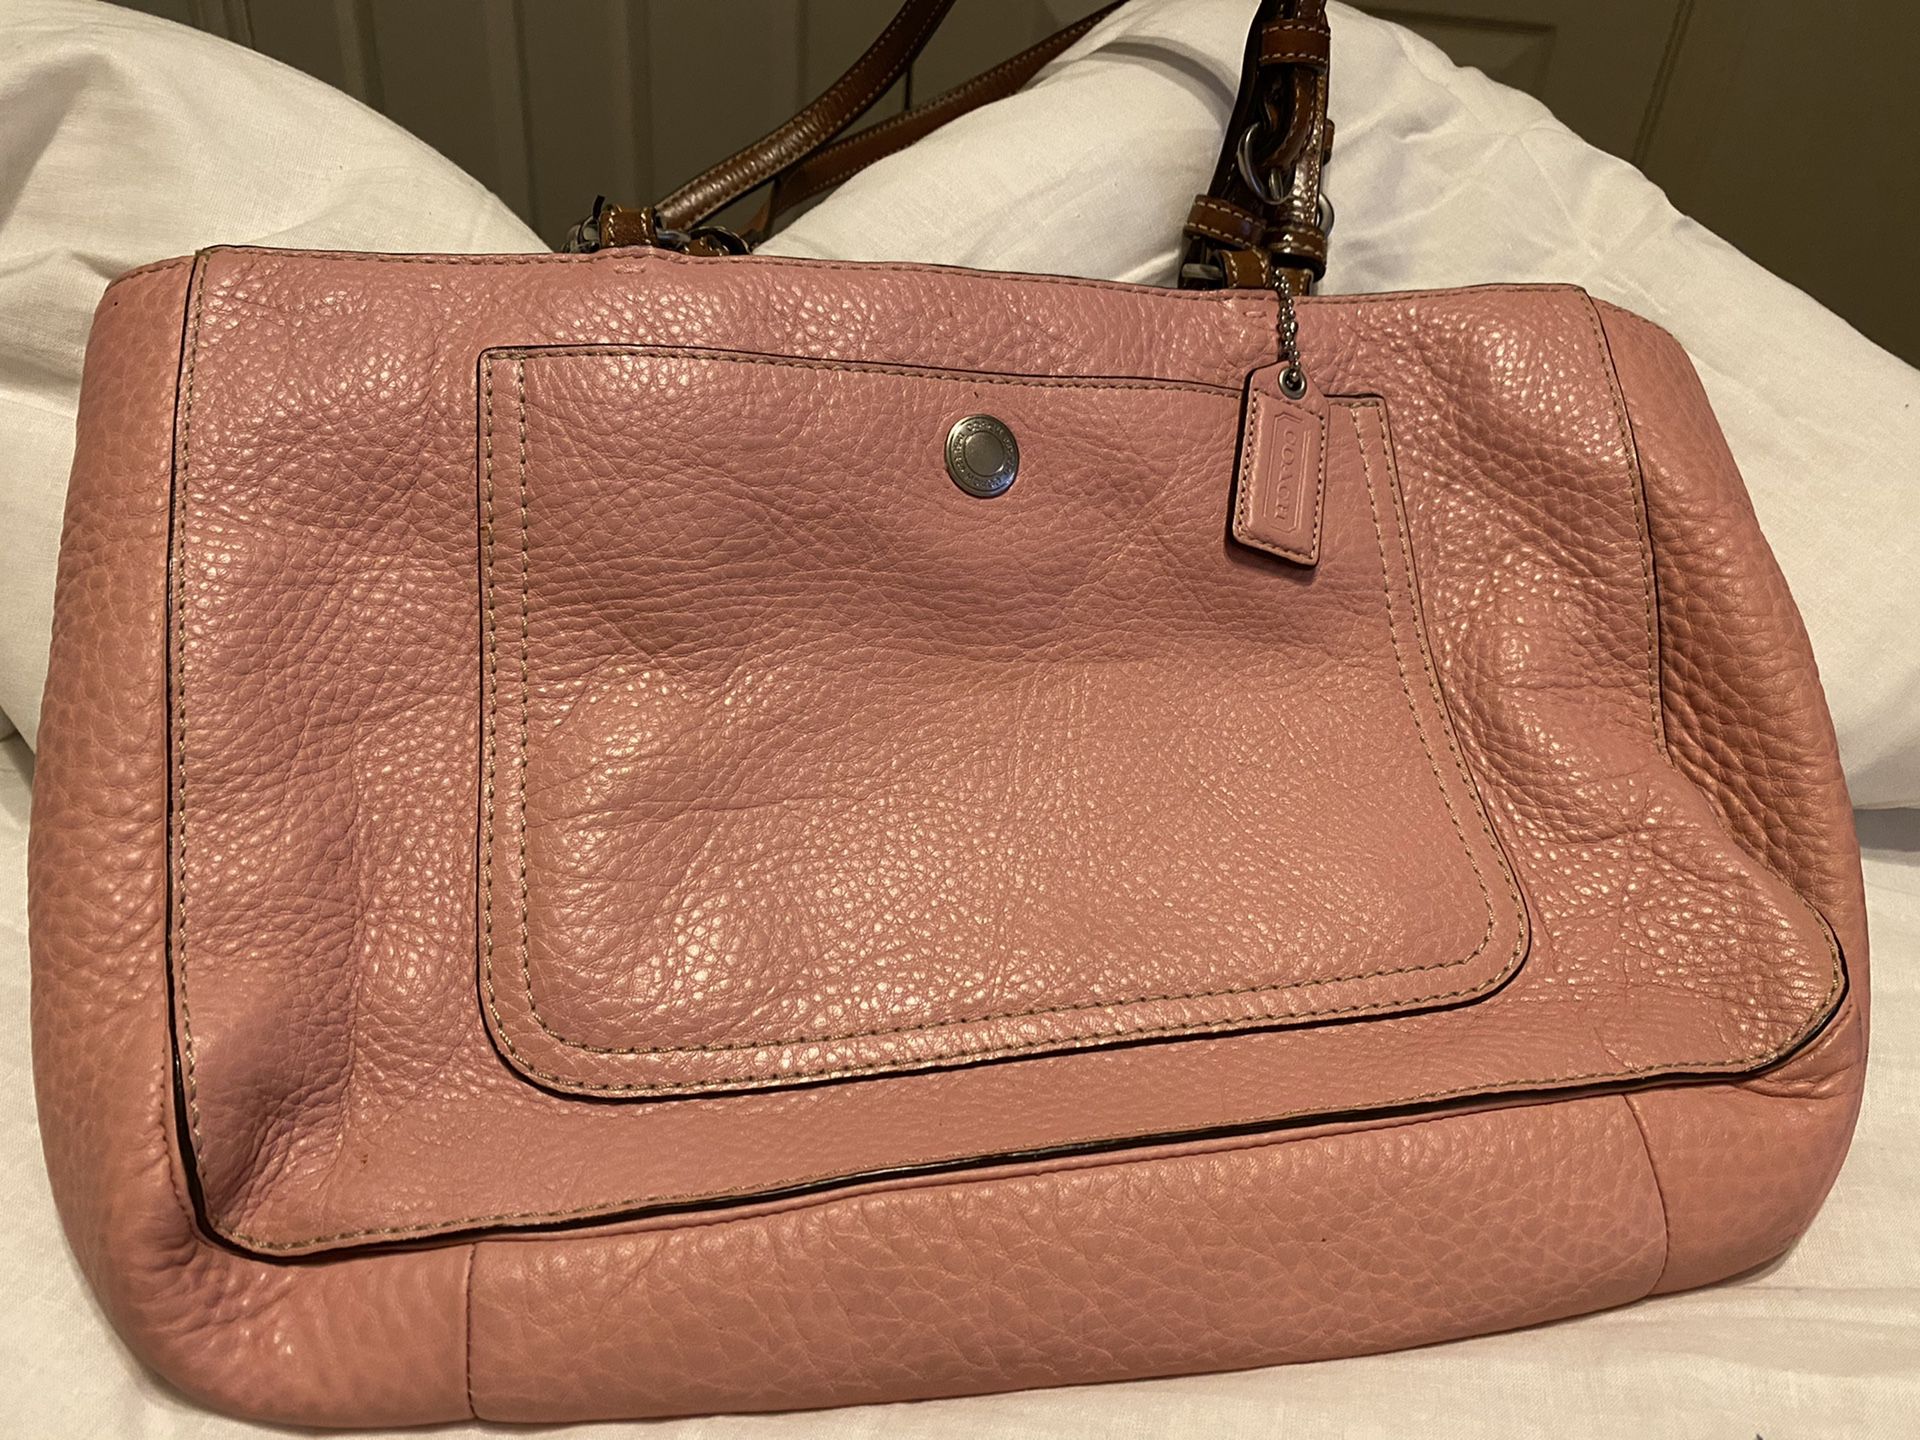 Authentic Leather Coach Purse PINK